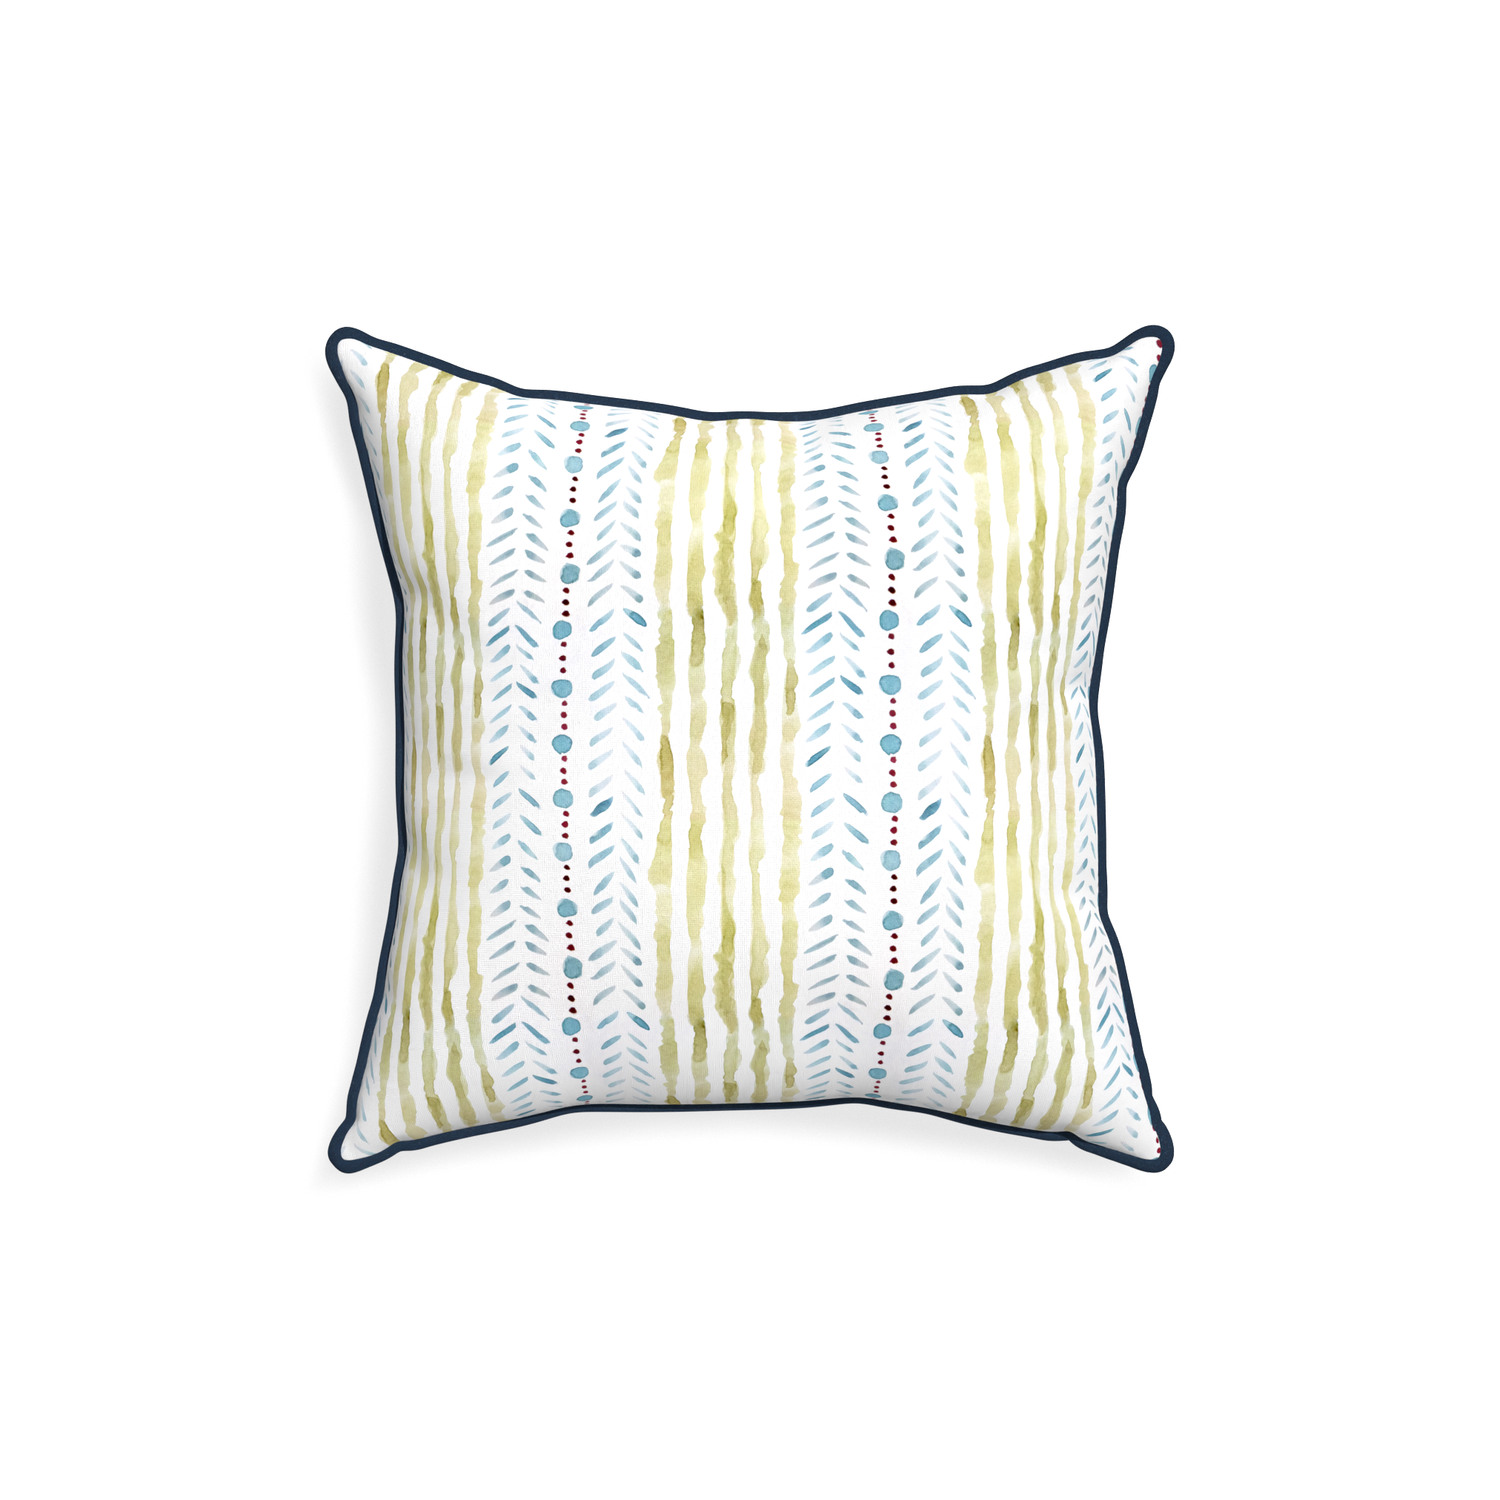 18-square julia custom blue & green stripedpillow with c piping on white background